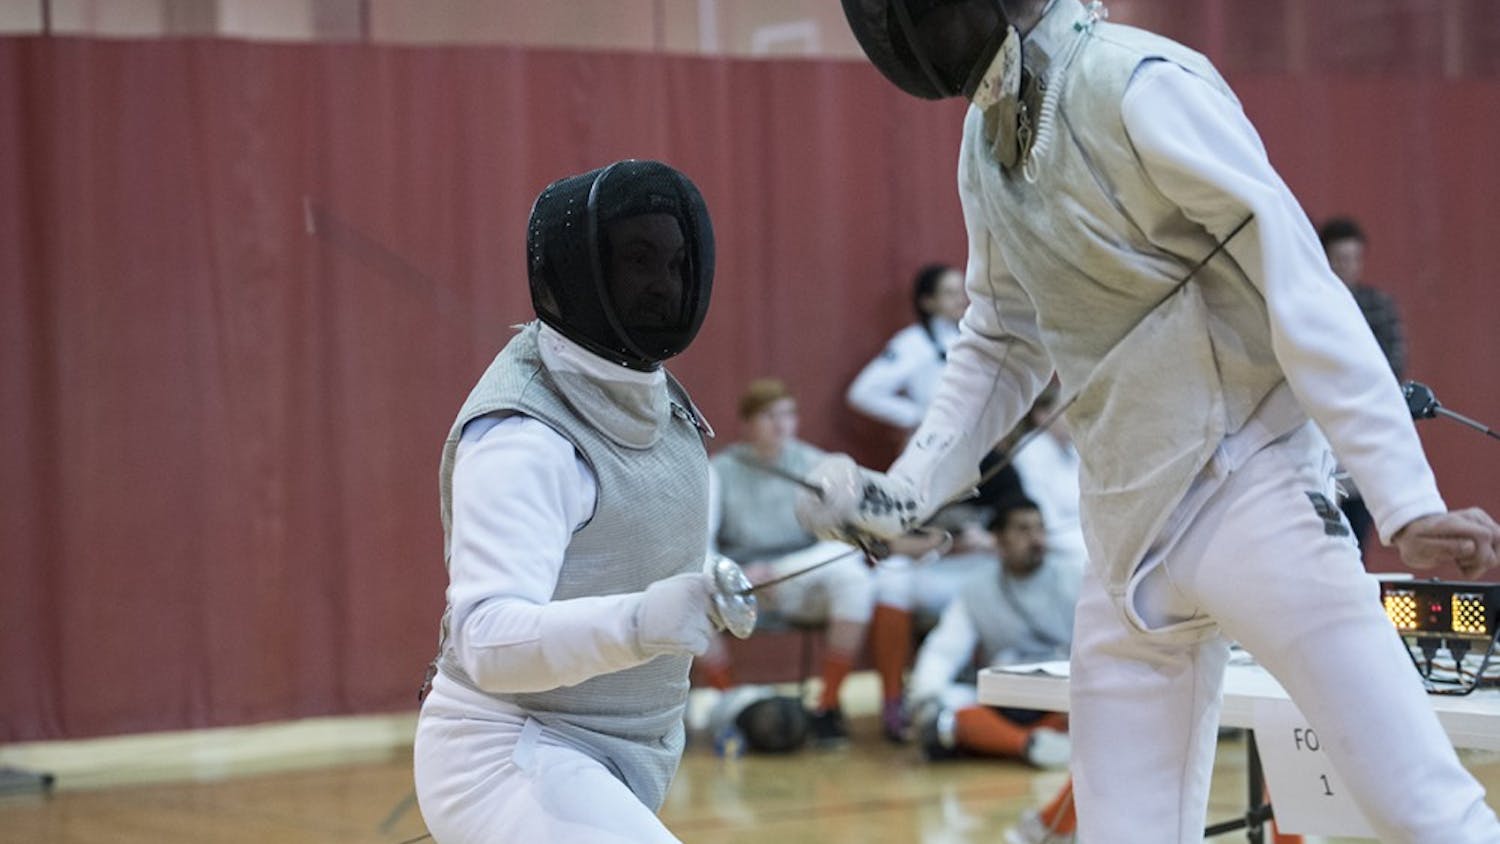 Junior Micheal Zelenka competes second in the foil match against Illinois. Men's foil fencing lost 4-5 to Illinois.